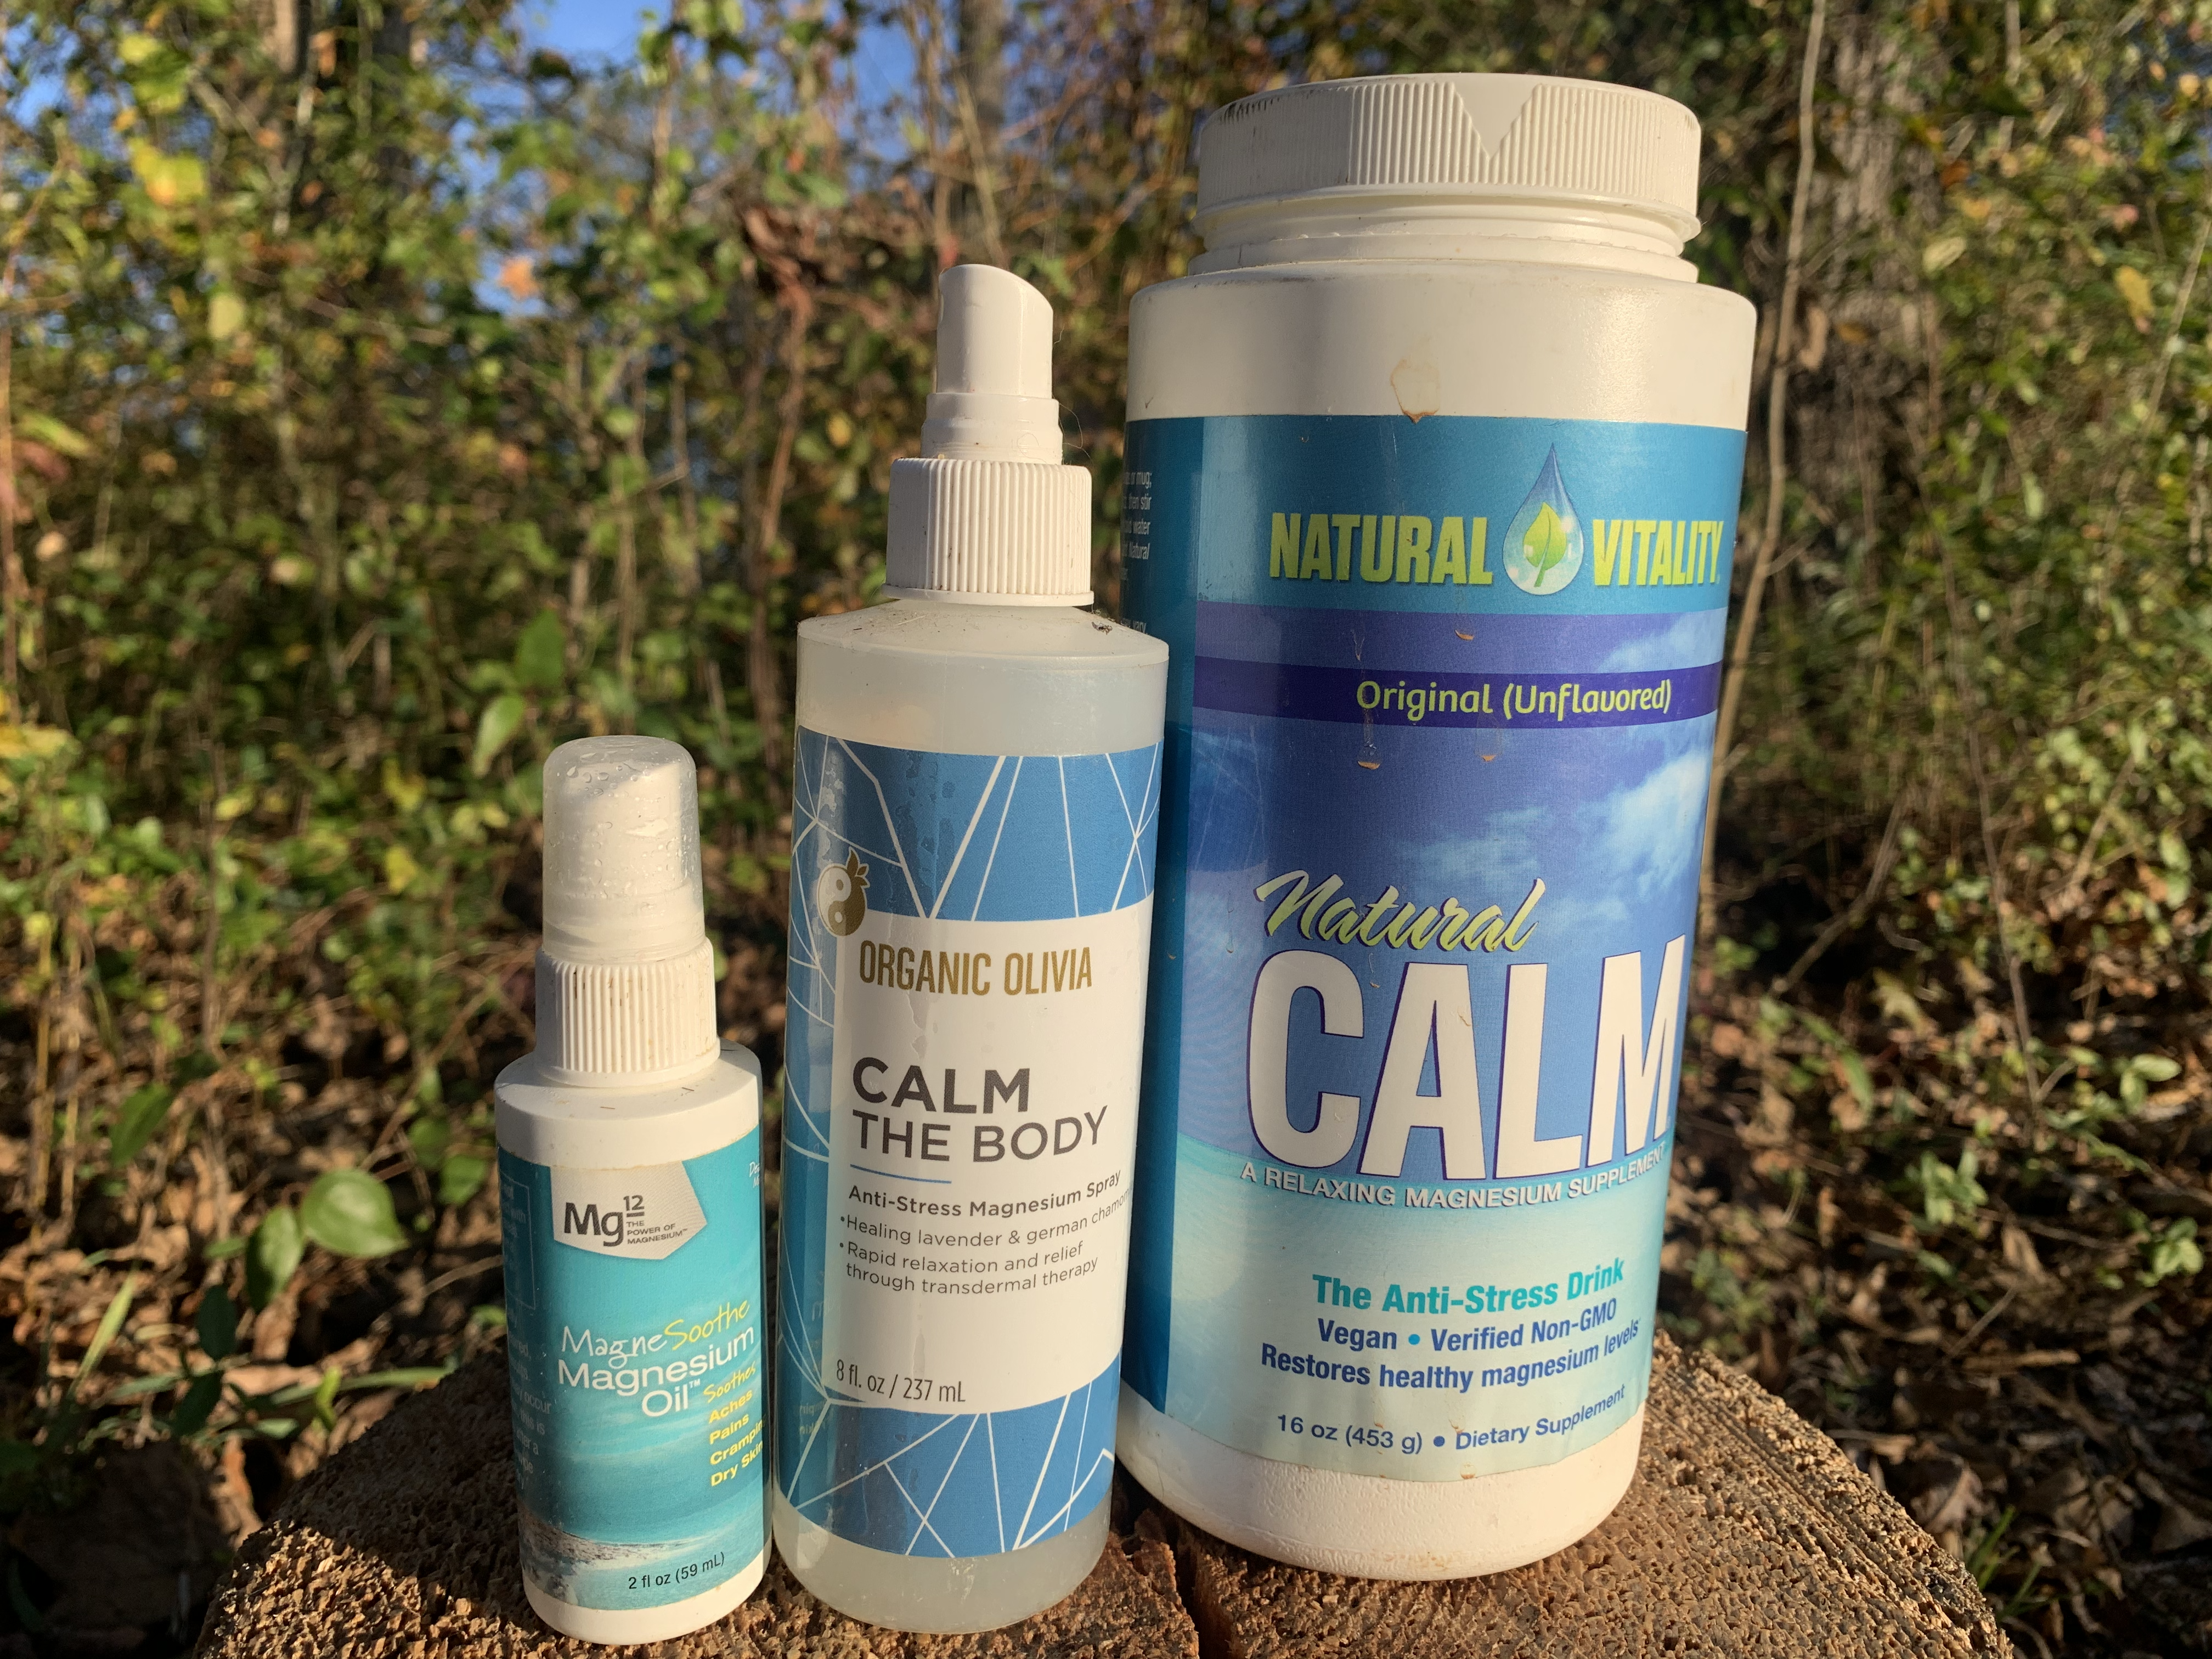 Ease Magnesium and Ancient Minerals - heatharmstrong.com